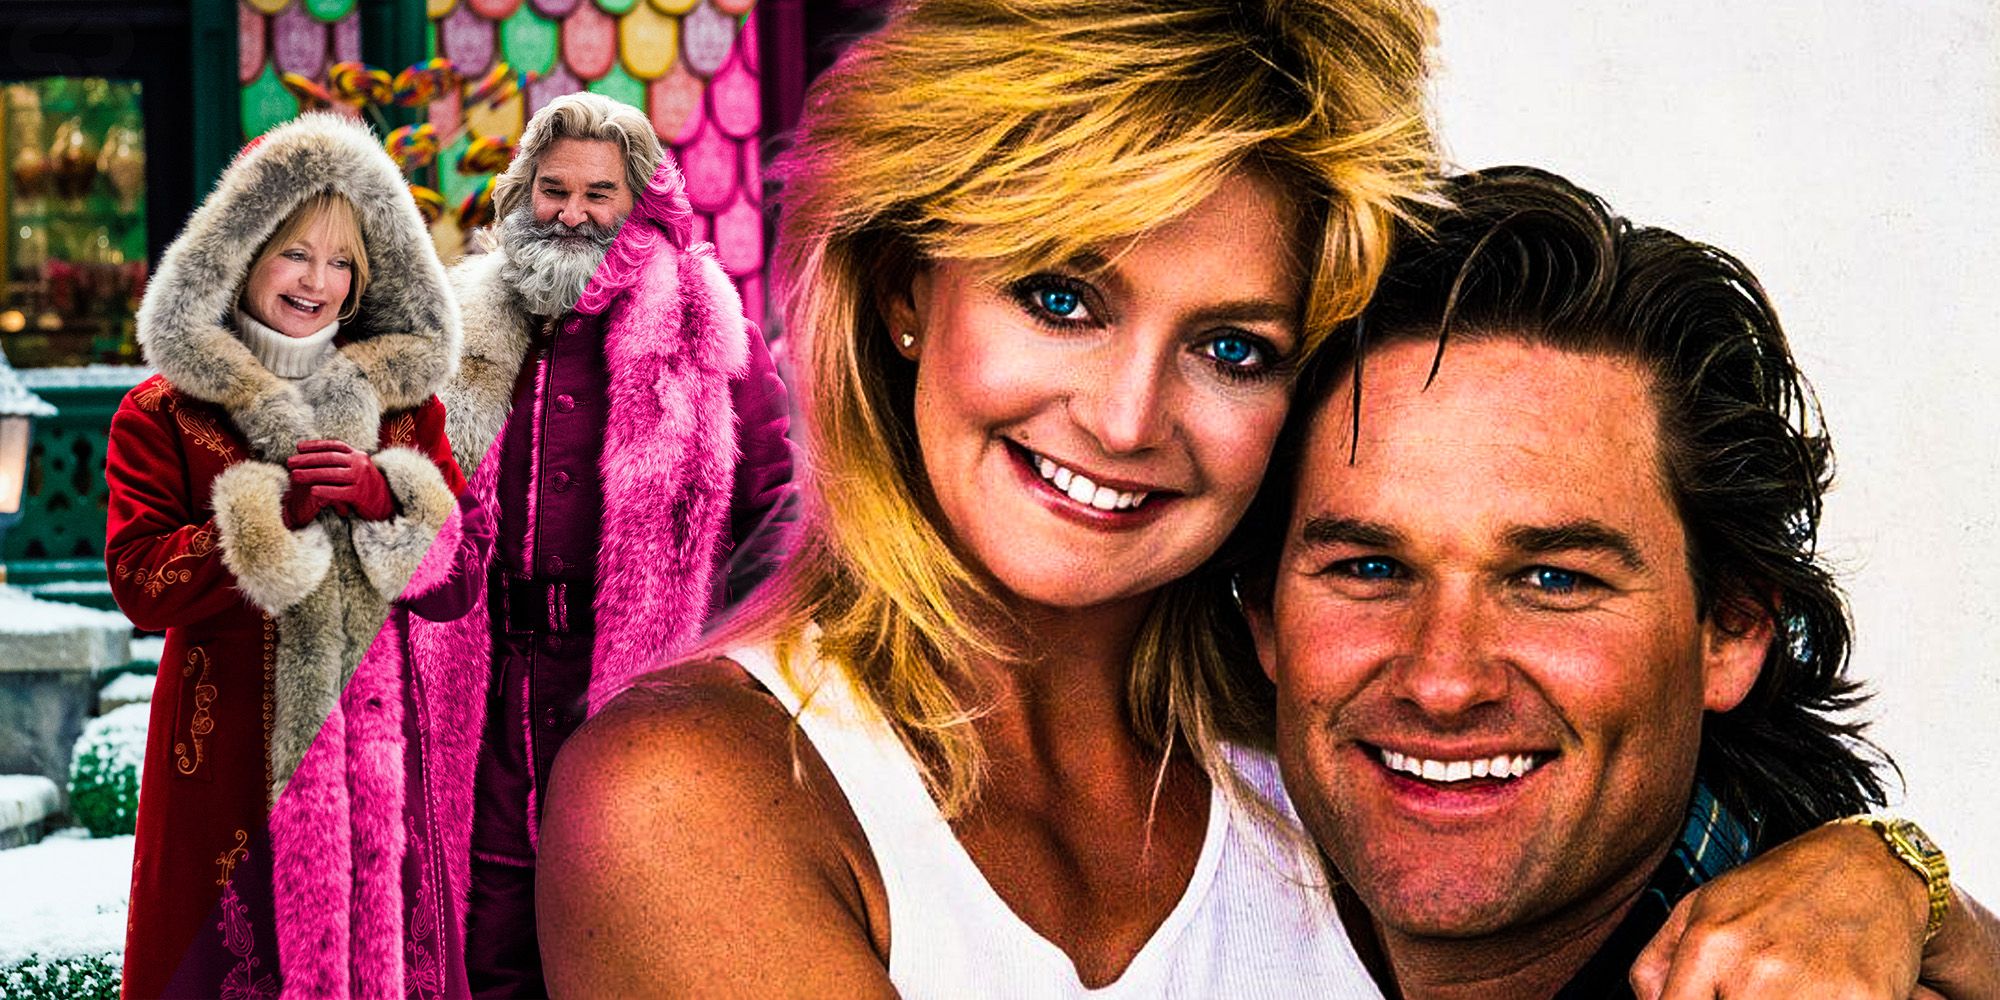 Kurt Russell and Goldie Hawn Overboard the Christmas Chronicles